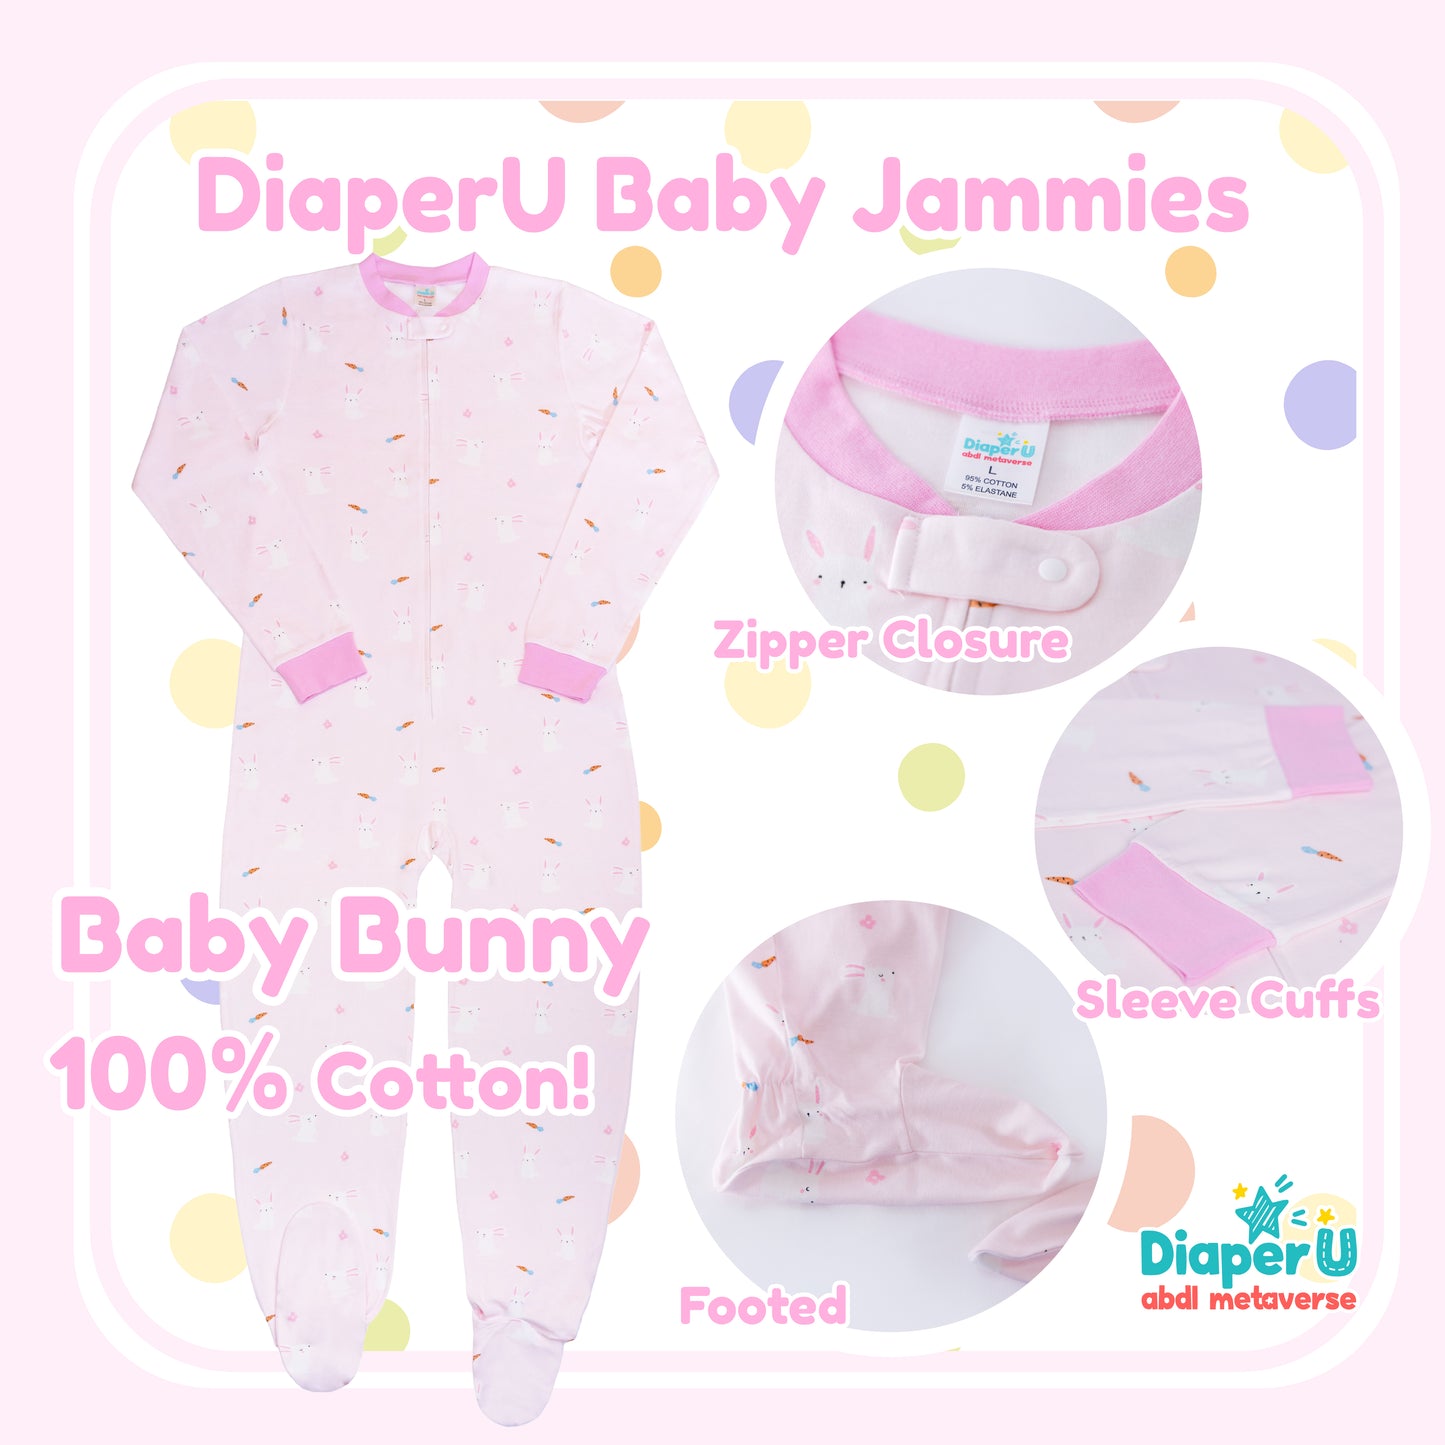 ABDL Footed Jammies - Baby Bunny